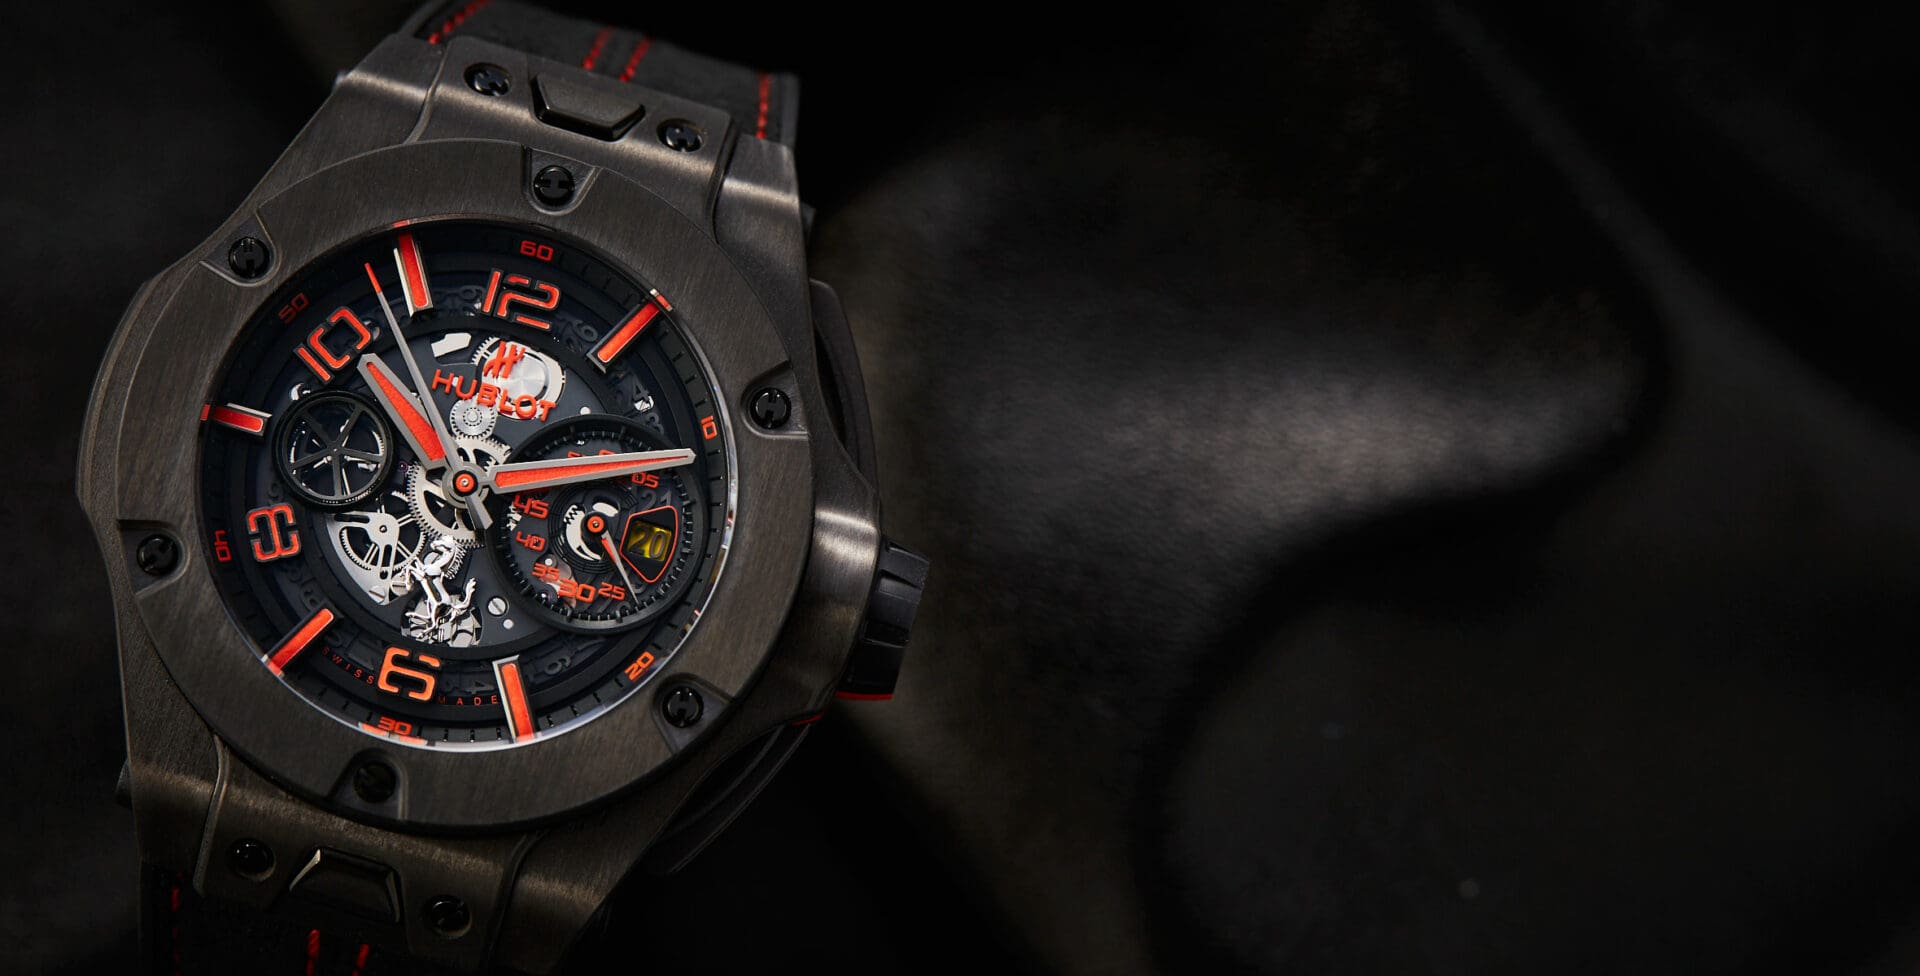 IN-DEPTH: Ostentatiously stealthy – the Hublot Big Bang Ferrari Unico in carbon